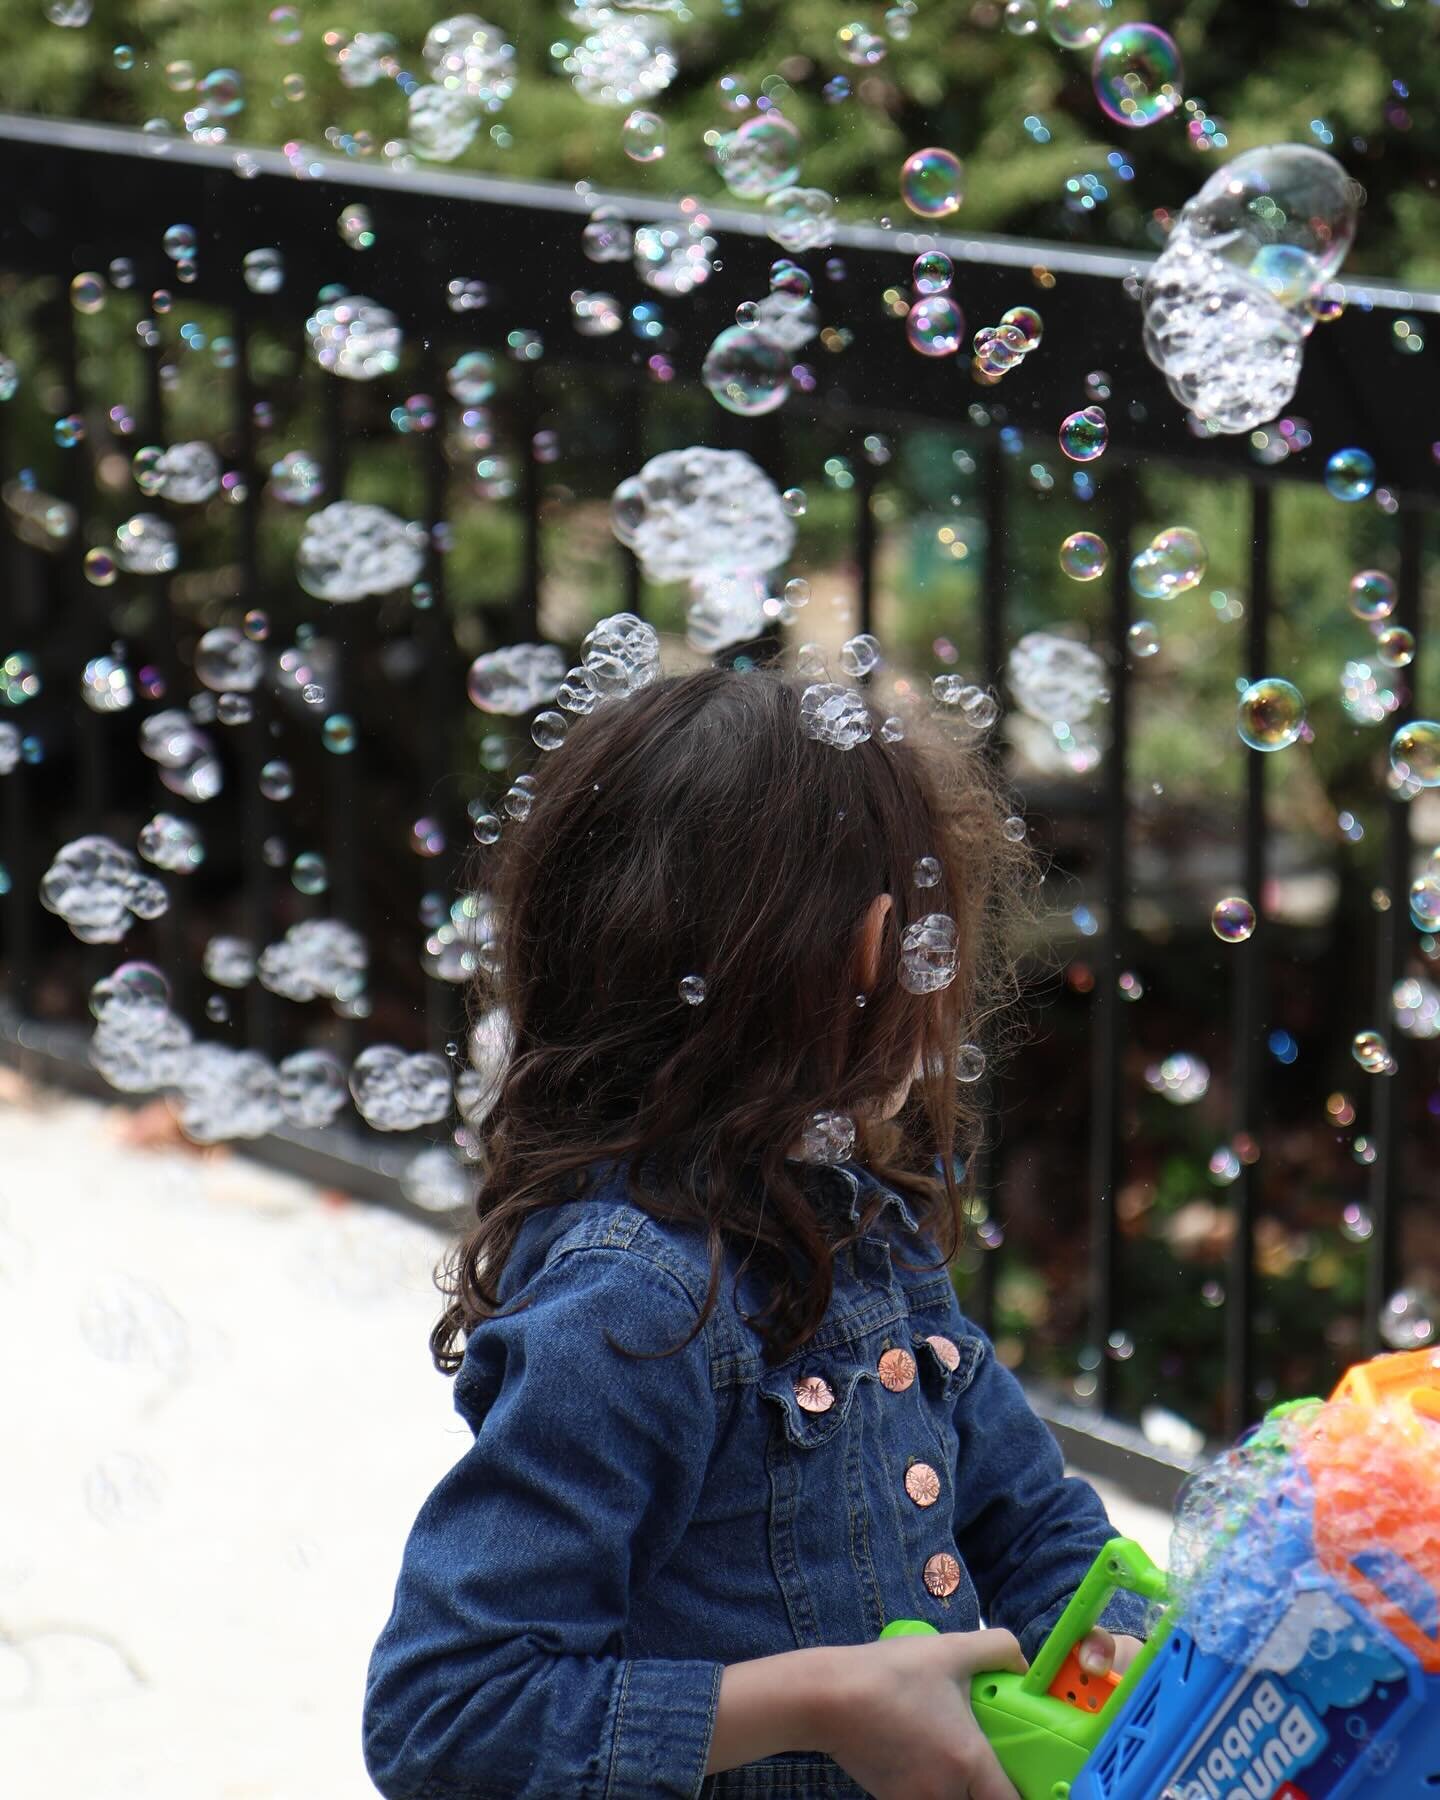 Fun with bubbles during our March ONE St. Martin&rsquo;s feast! We hope you&rsquo;ll join us for our April ONE St. Martin&rsquo;s on April 7.

On the first Sunday of each month, we bring our whole community together in one worship Service of Holy Euc